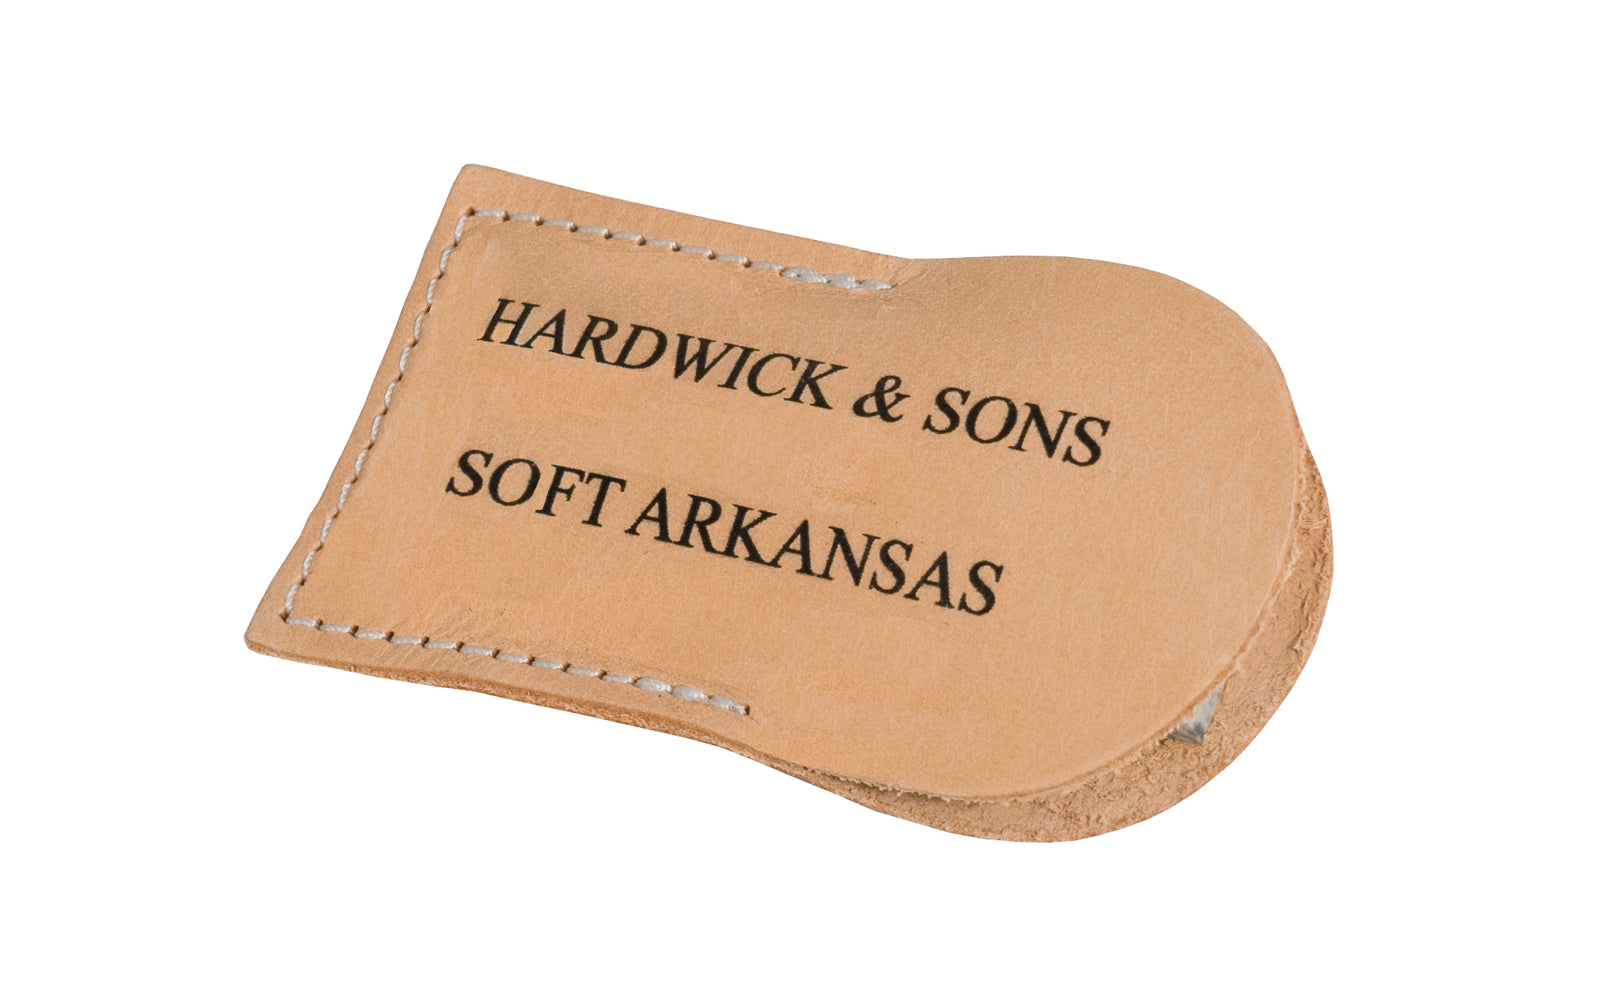 Soft Arkansas Slip Stone with Leather Pouch ~ 3" x 1" - Made in USA ~ Extra-fine stone. It is the least dense & coarsest grained of the natural Arkansas stones & good for starting an edge on your tools & knives; commonly used after synthetic or oil stone - Model No. MAP-13A-L